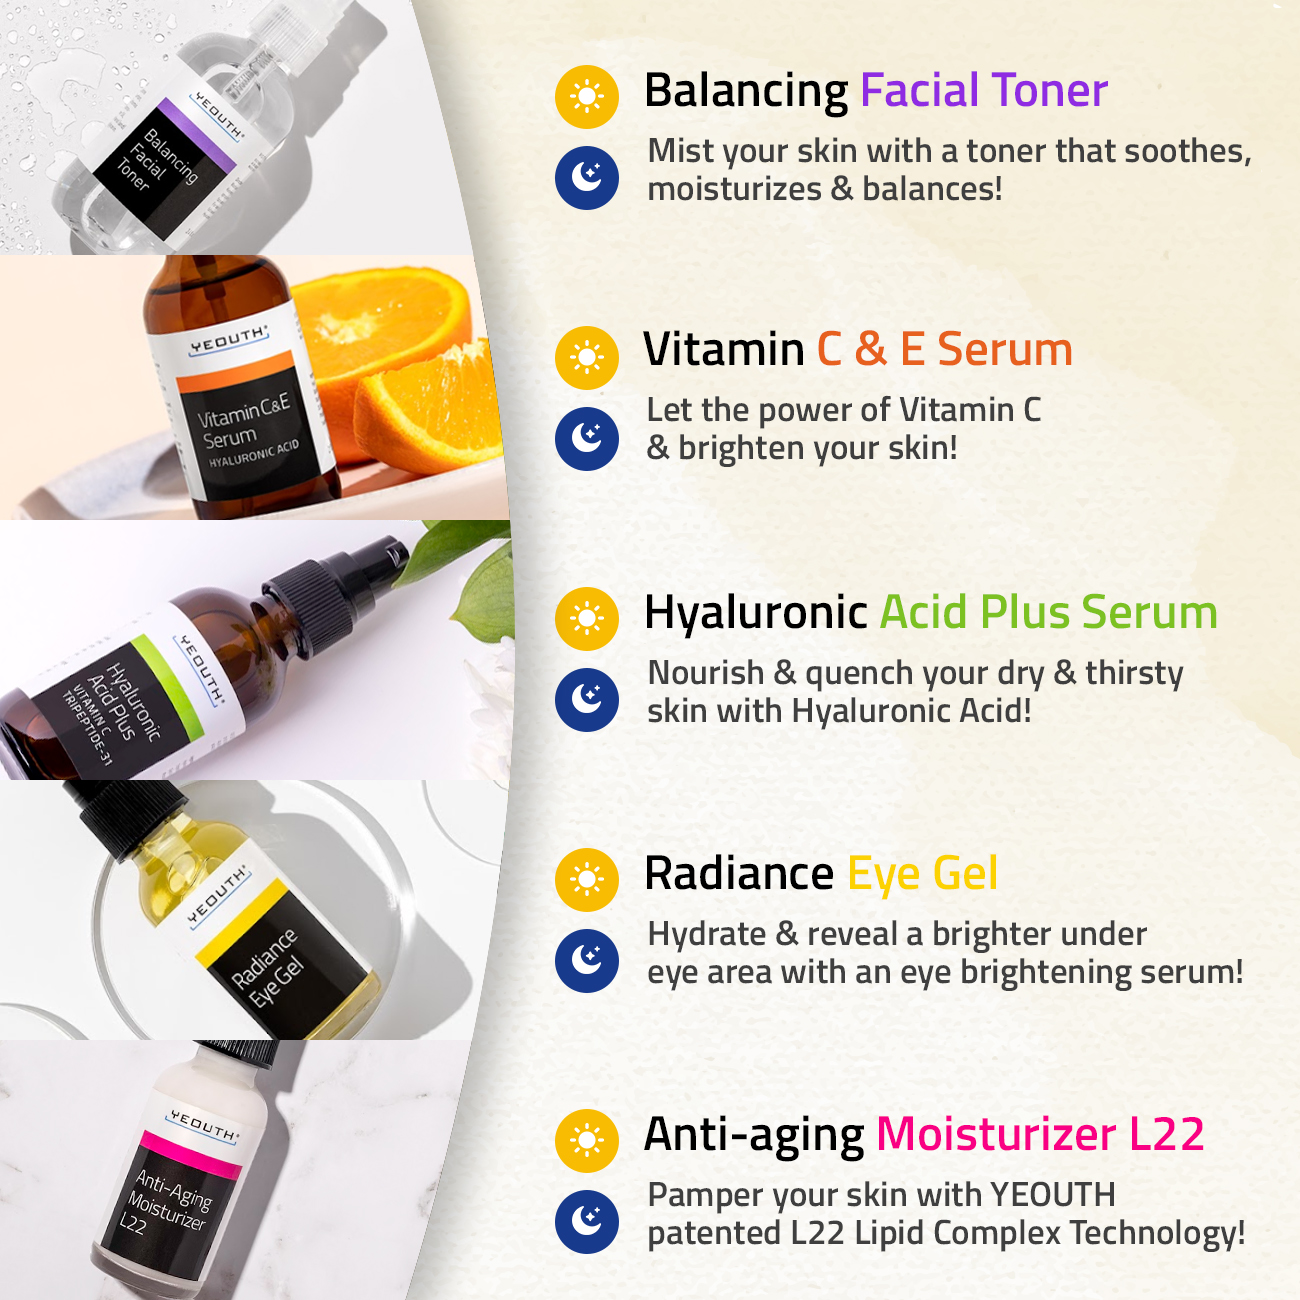 Hyaluronic Acid Serum,Vitamin C Face Serum, Toner, Eye Gel, Face Cream, Facial Skin Care Products for Men & Women 5-Piece Skin Care Kit, Hydrate & Nourish Skincare Essentials Plus by YEOUTH - image 2 of 6